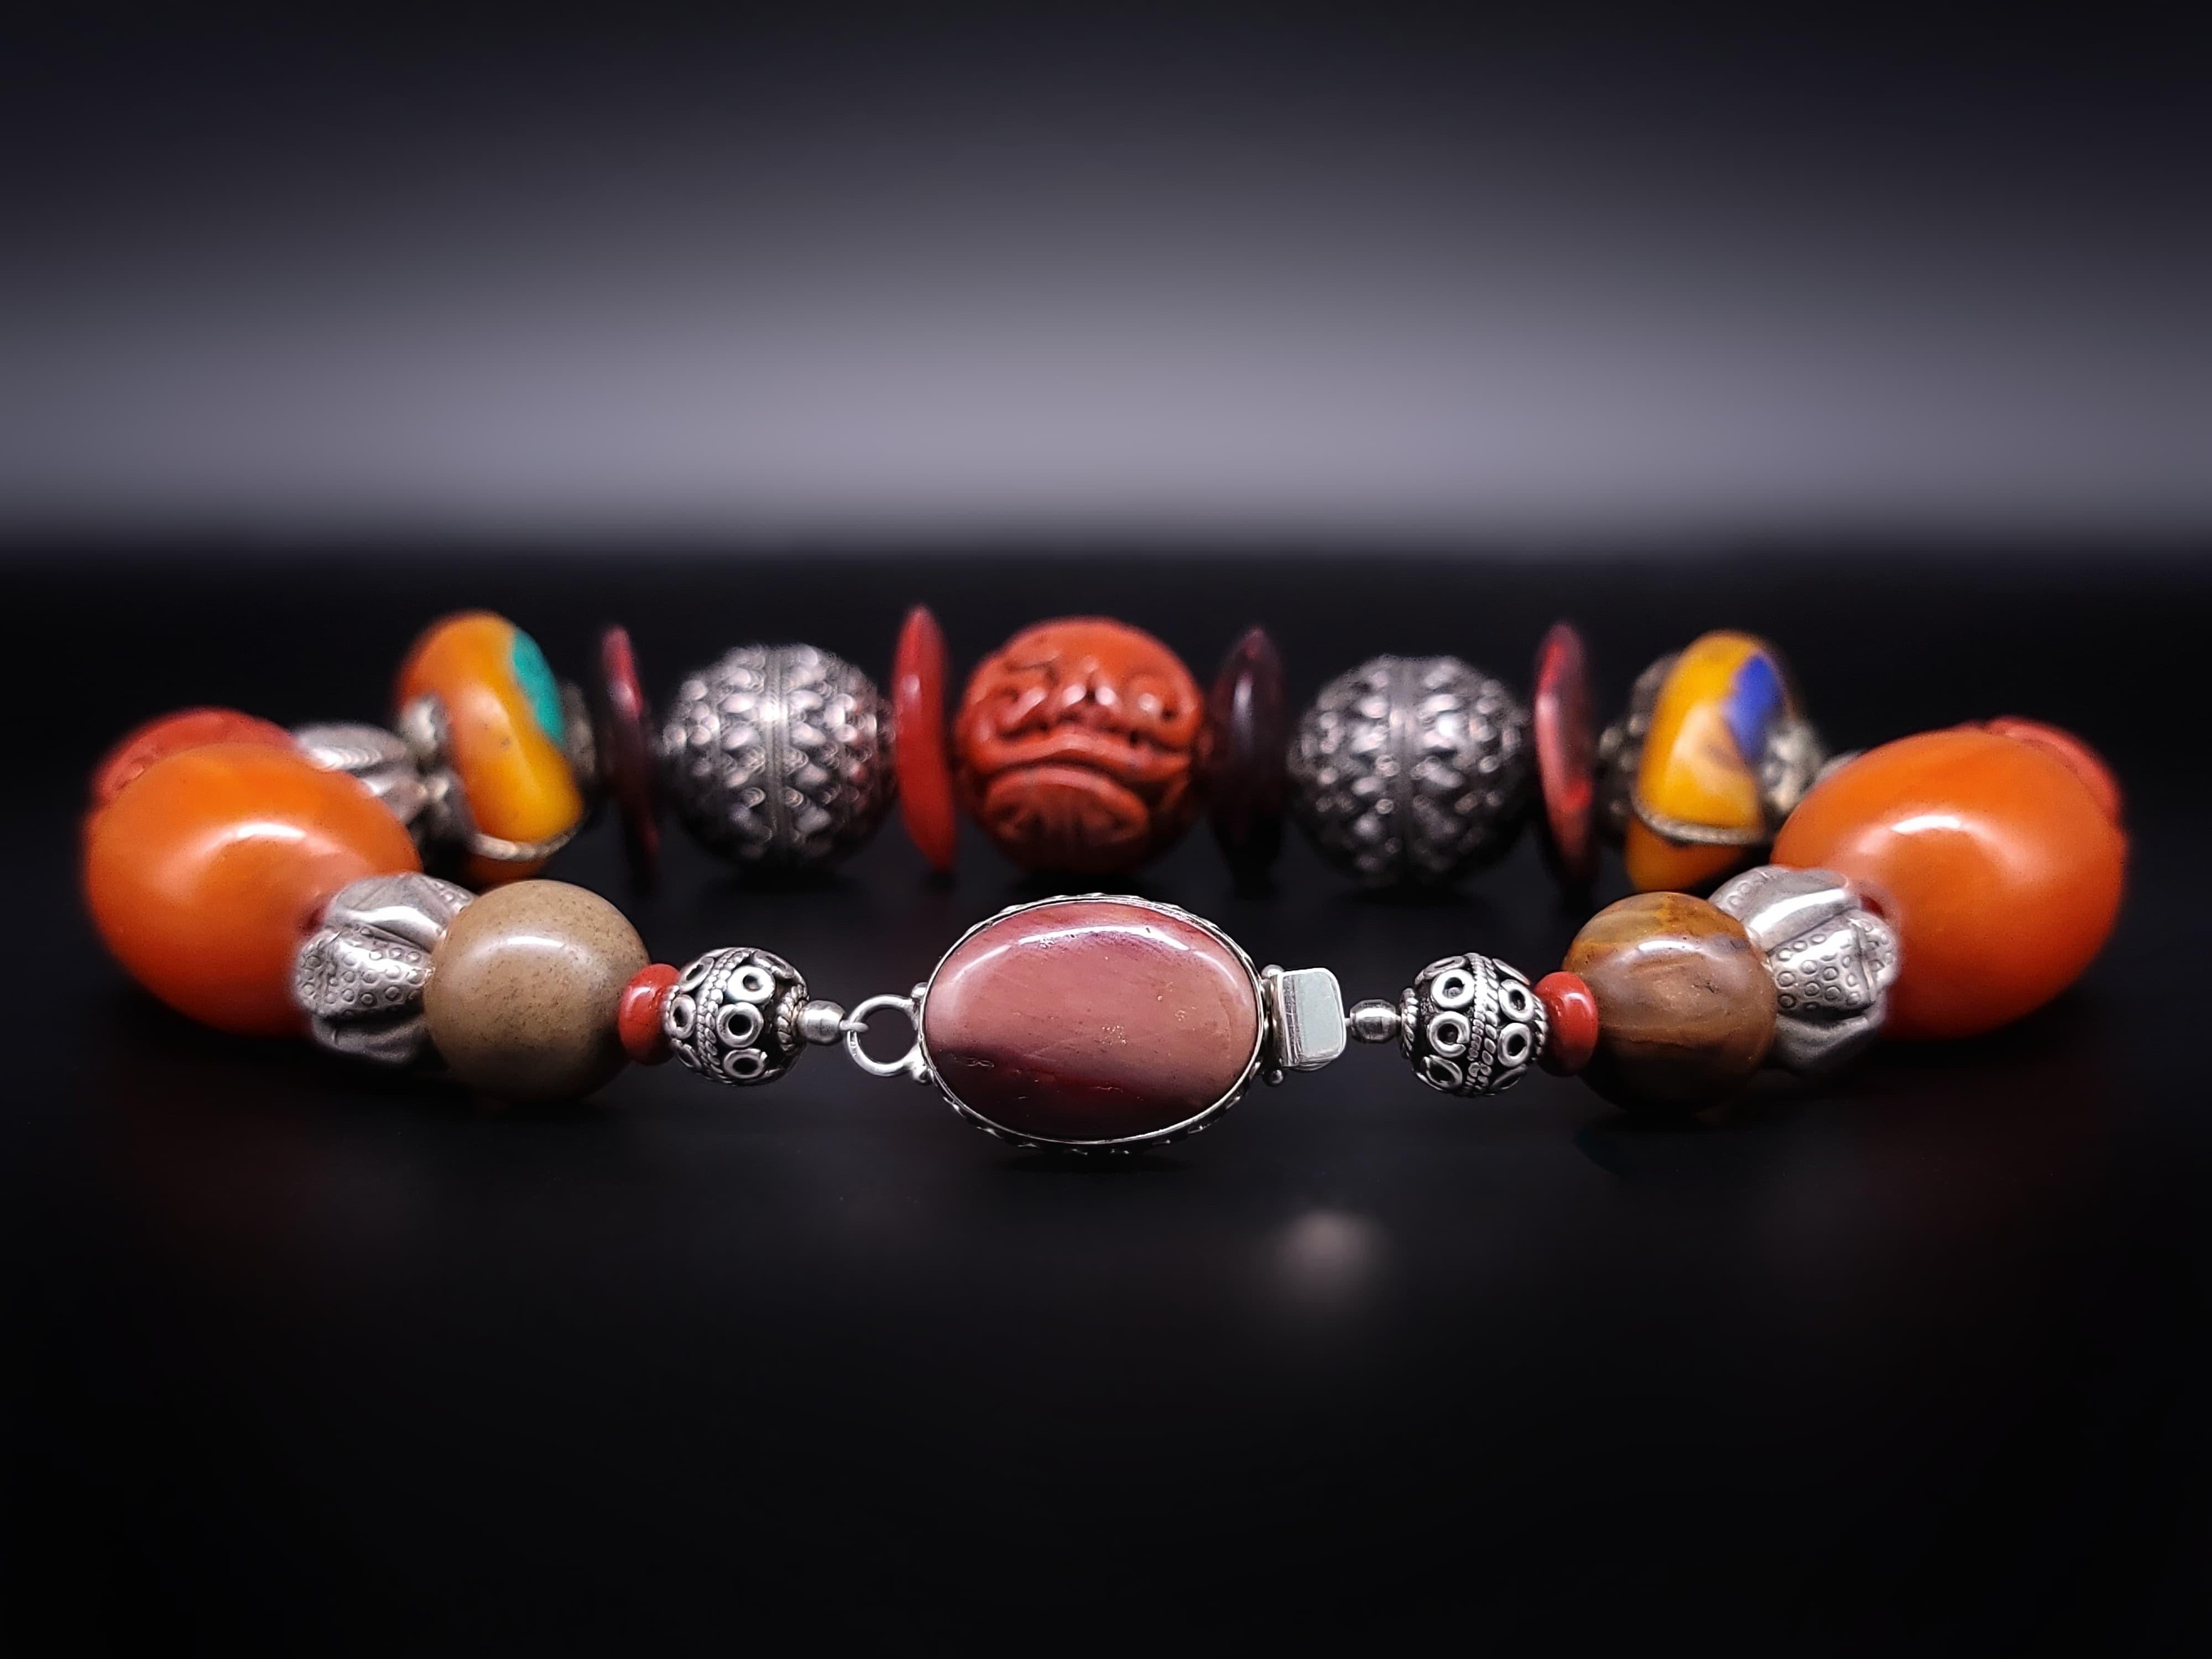 A.Jeschel Tibetan Amber necklace with Carved Ceramic. 2